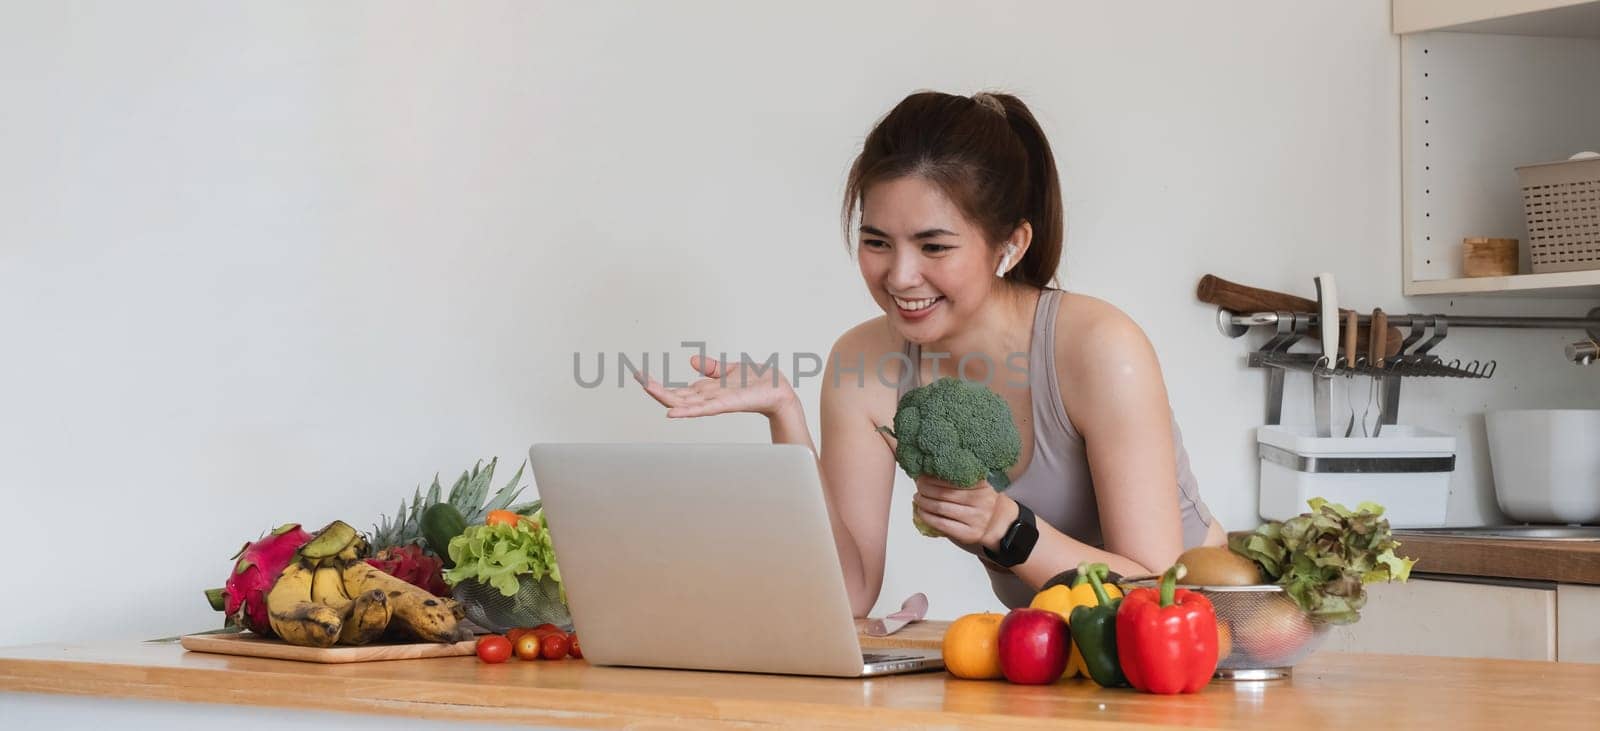 A woman is sitting at a table with a laptop and a bunch of vegetables. She is smiling and she is enjoying herself